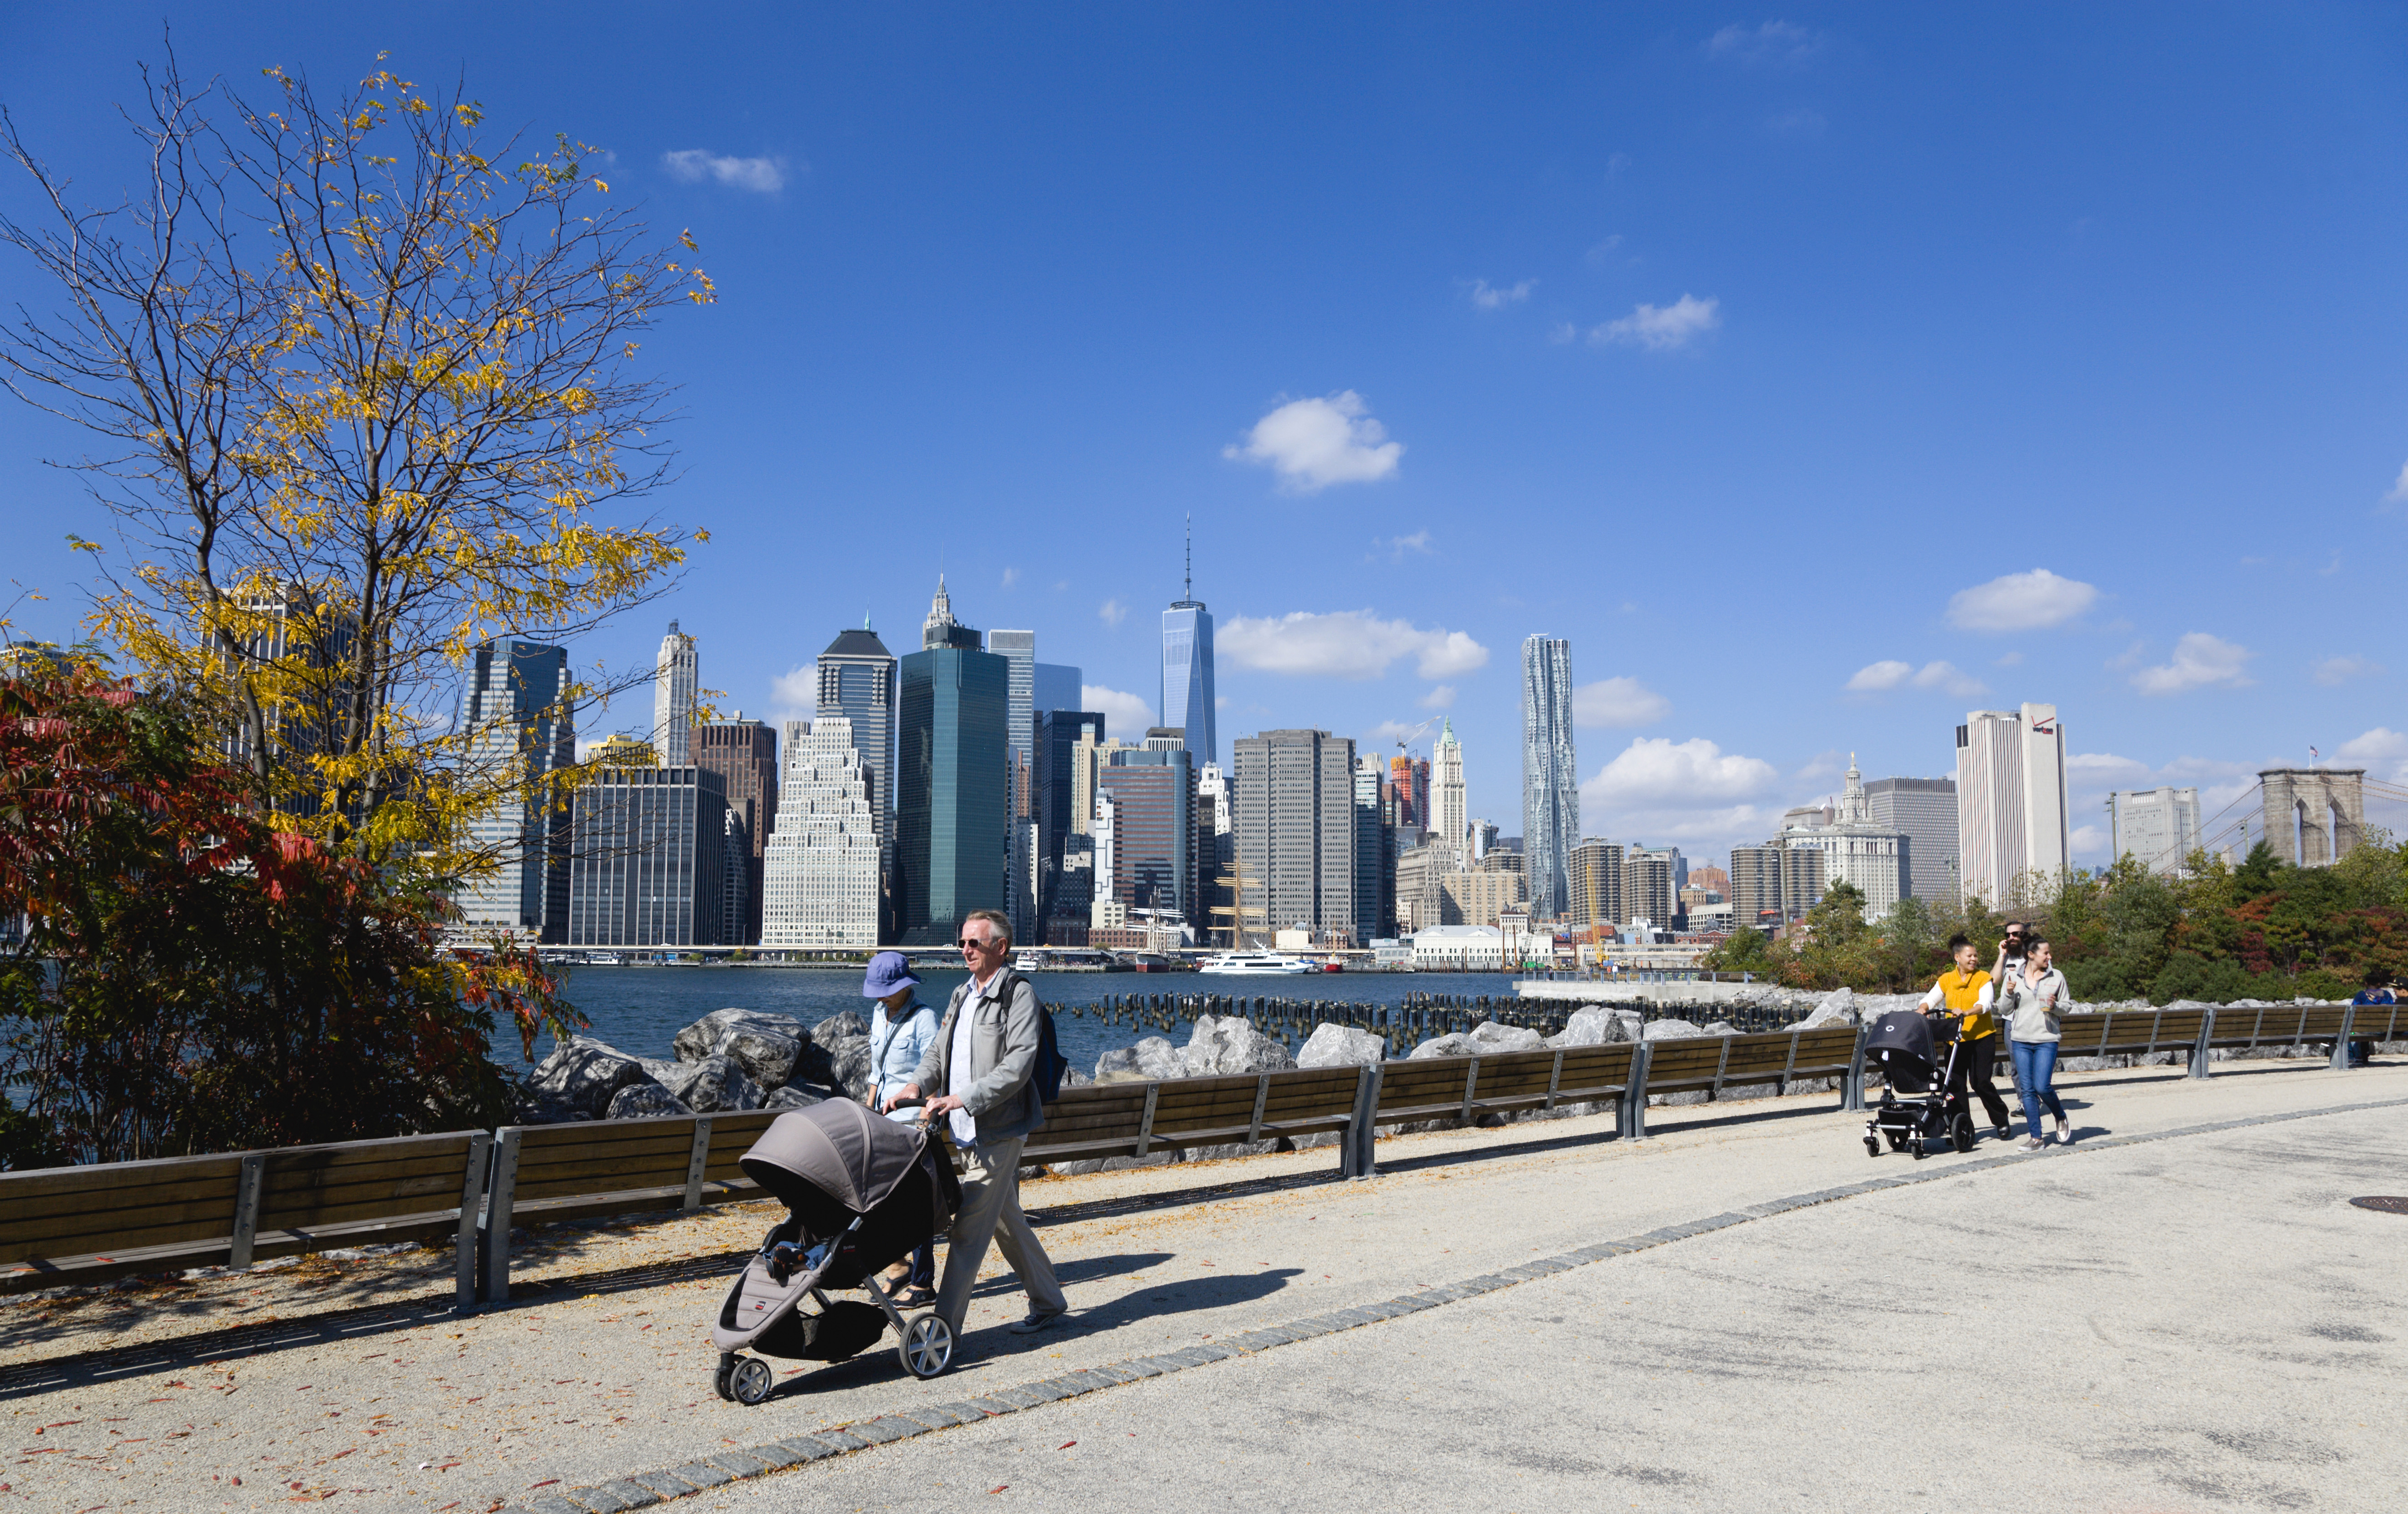 The New York City skyline with pedestrians and strollers in the foreground.